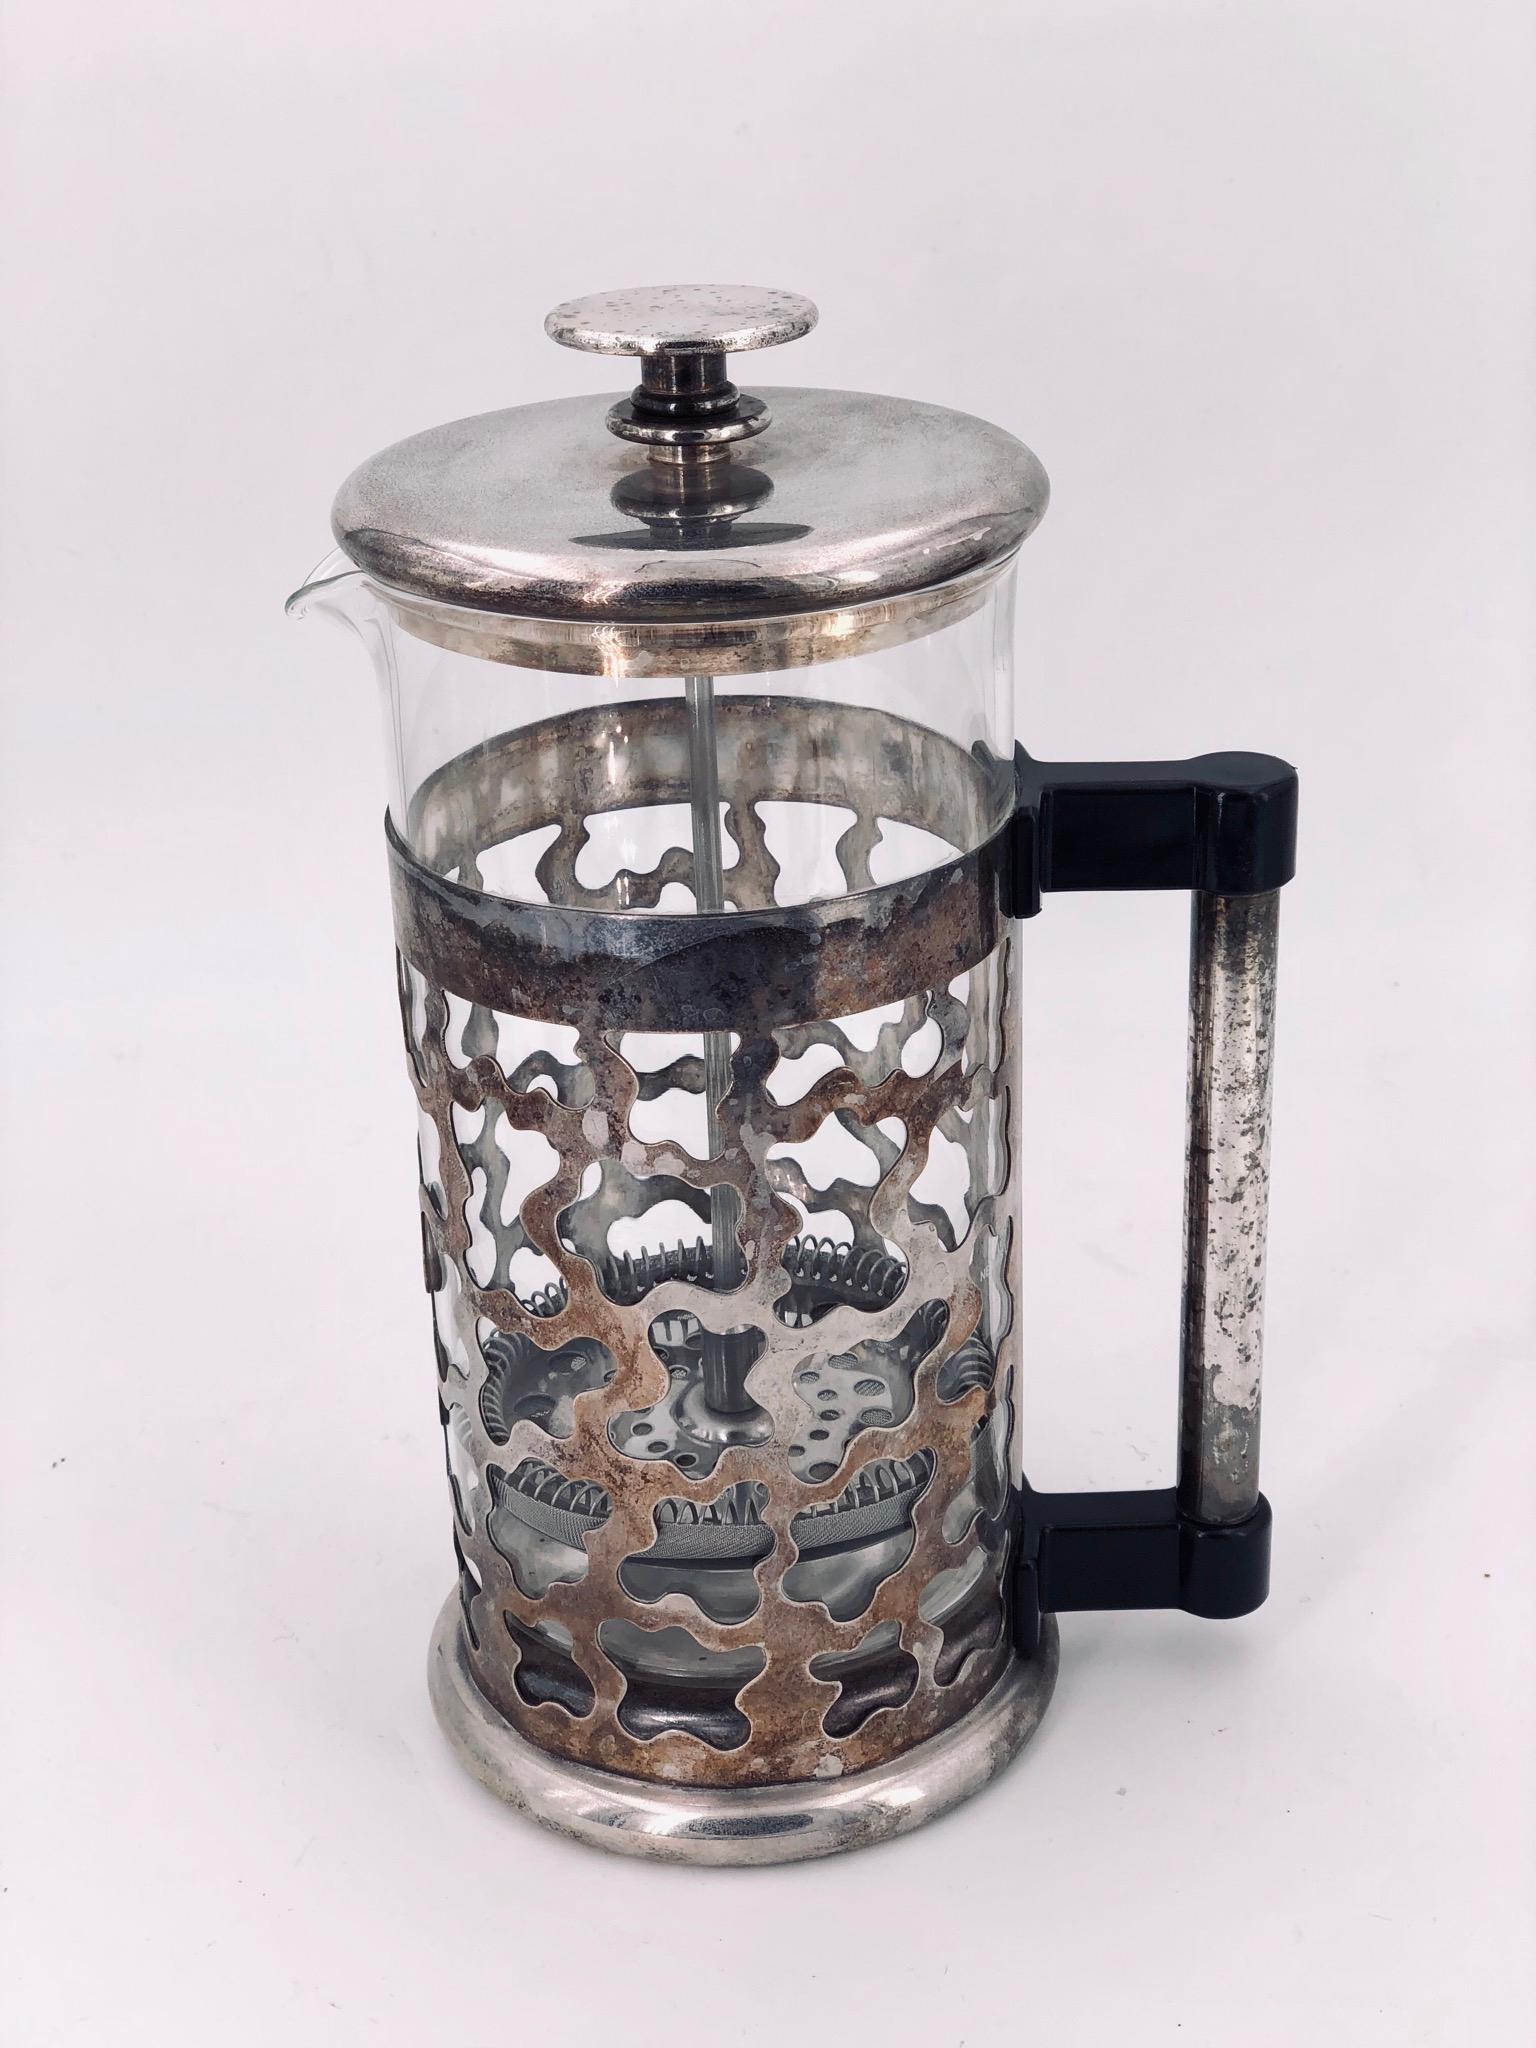 Post-Modern Rare French Press Coffee Maker Set Designed in 1987 by George Sowden Memphis Era